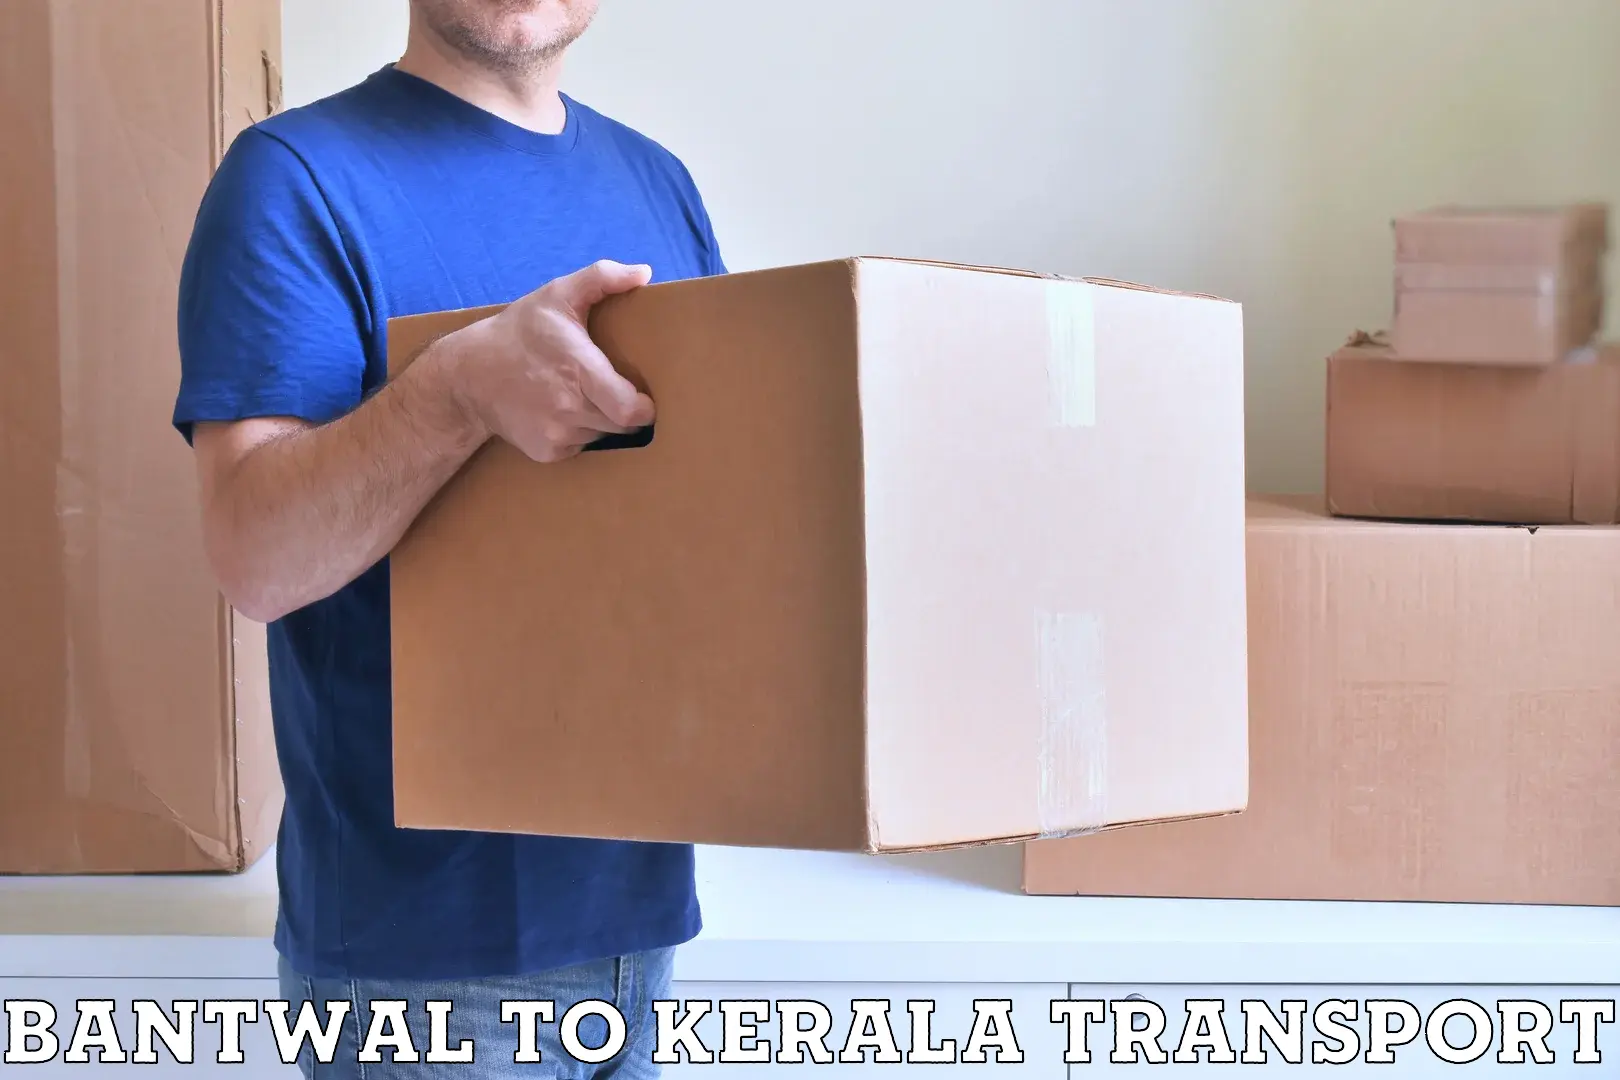 Road transport services in Bantwal to Kattappana